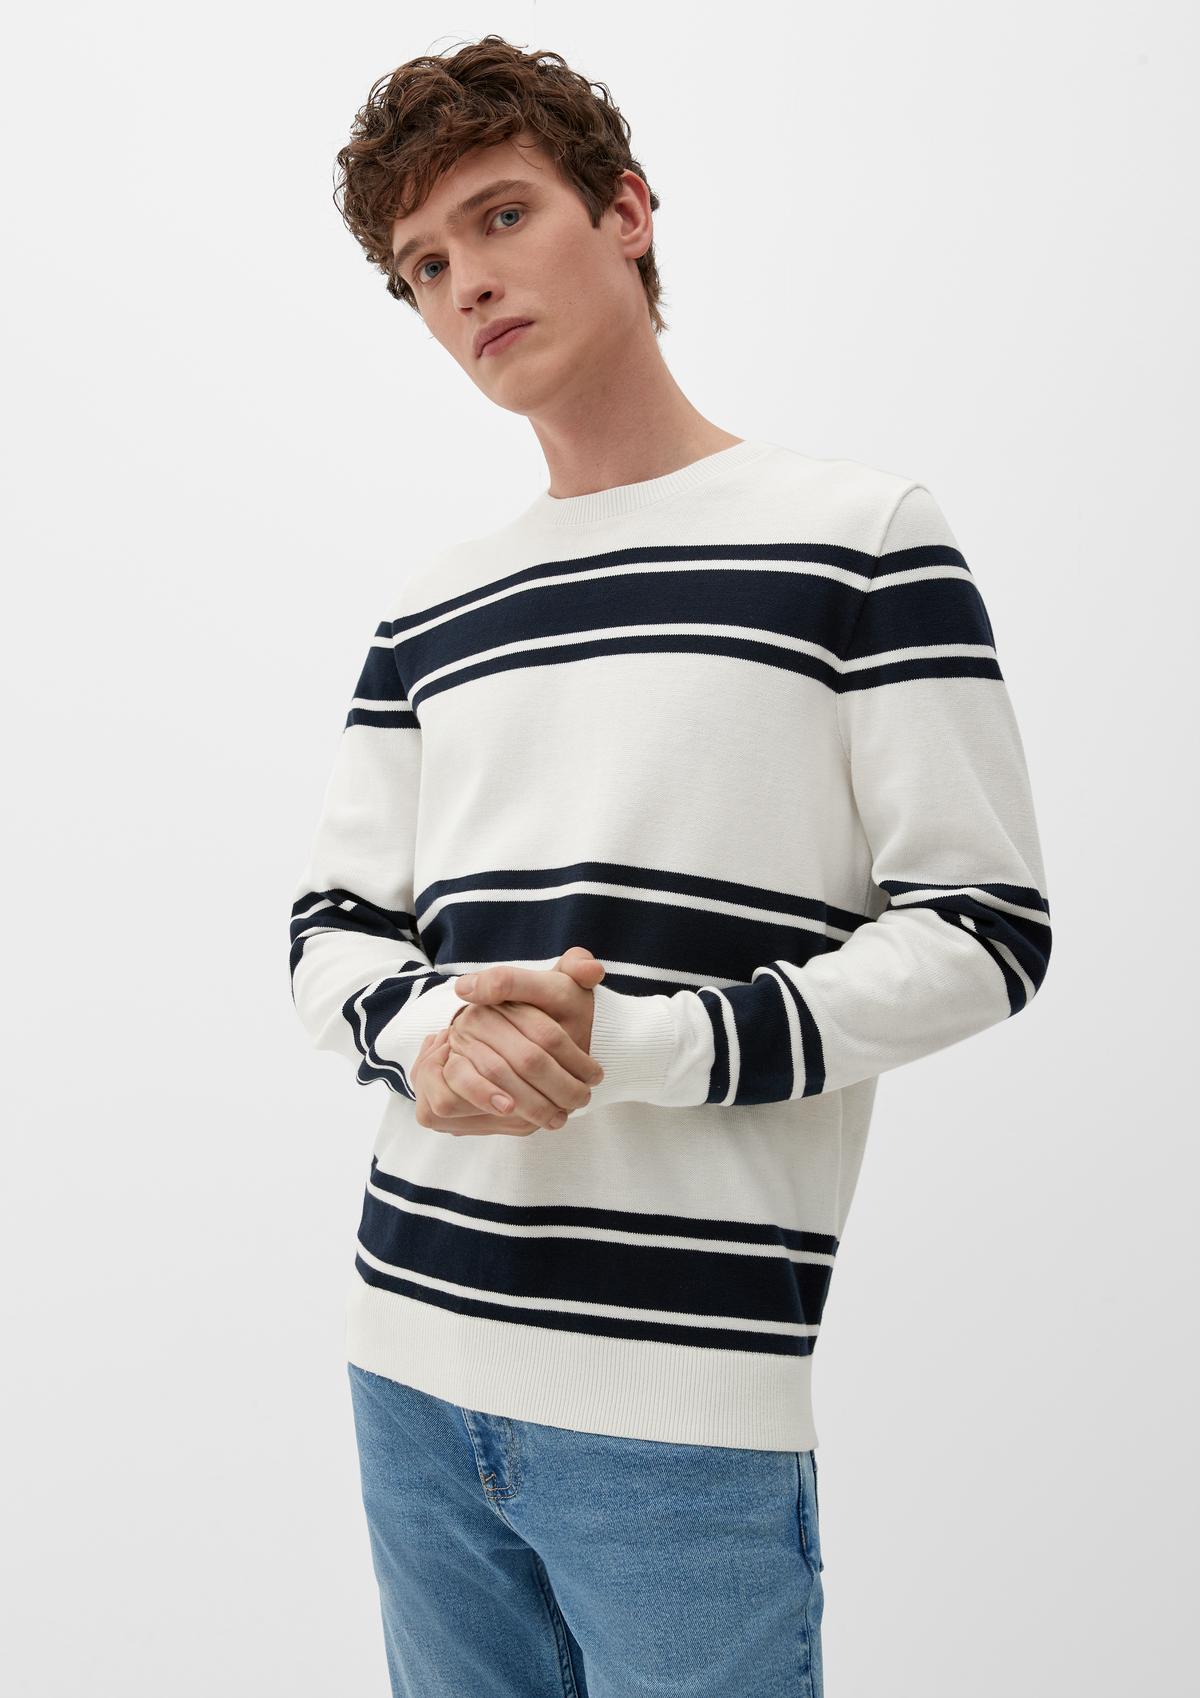 Knitted jumper made of cotton